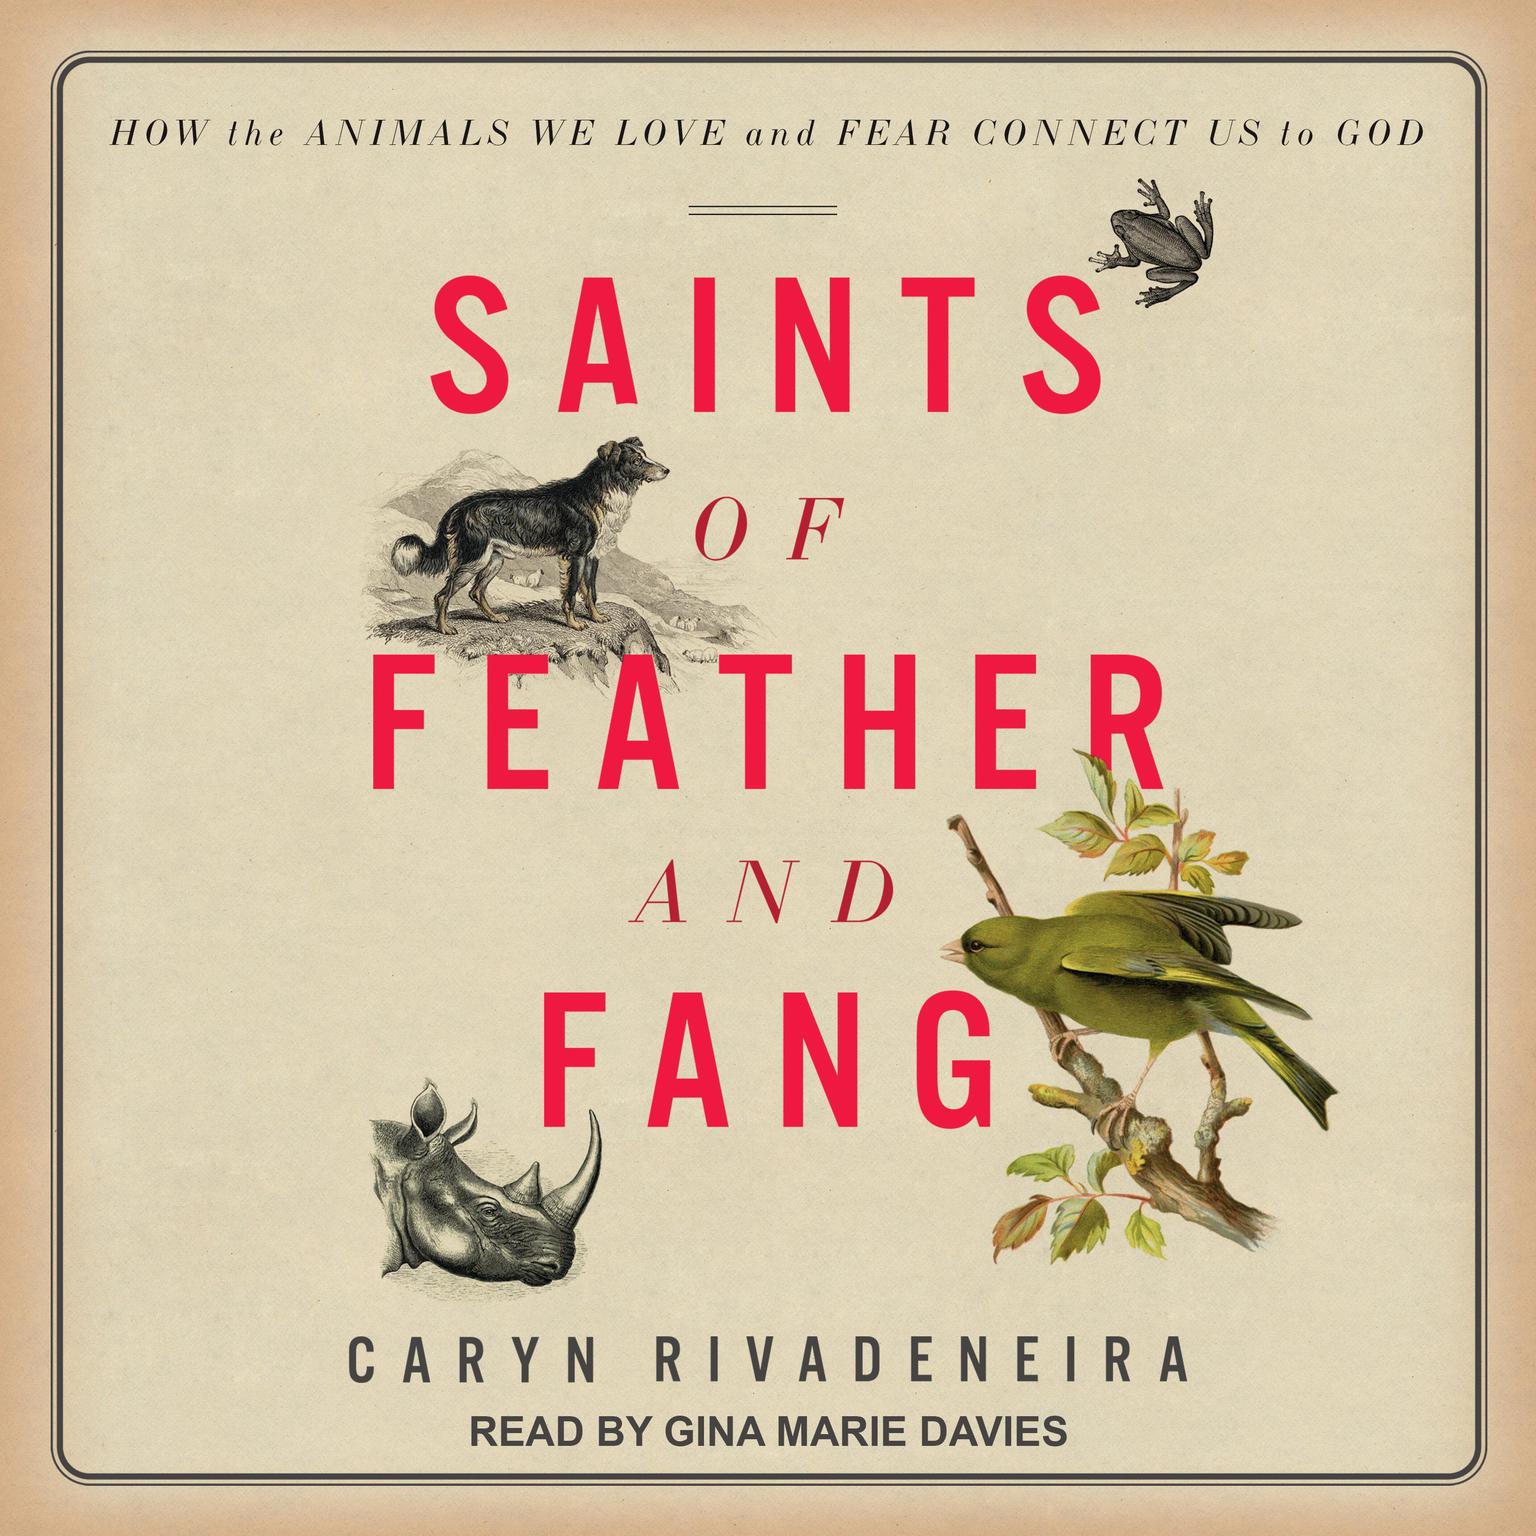 Saints of Feather and Fang: How the Animals We Love and Fear Connect Us to God Audiobook, by Caryn Rivadeneira